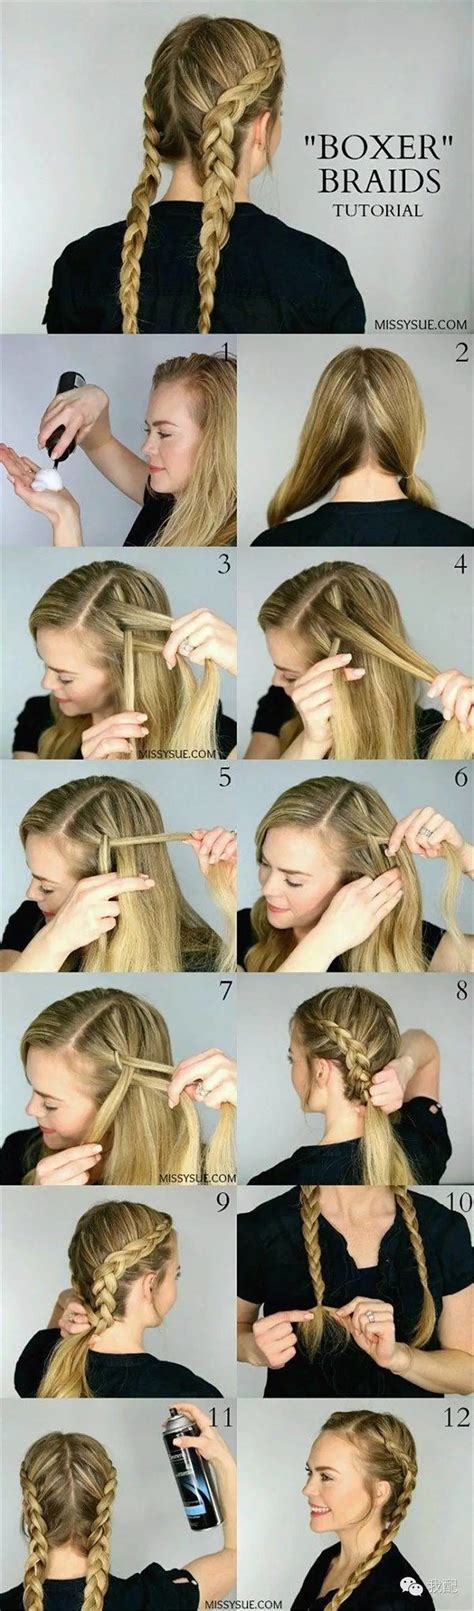 1. Prep the top section. Start by finger combing the top section of your hair, particularly the bang area. Gather this section and secure it at the back, creating a small poof in the front. Use bobby pins to keep it in place. Making Dutch braid. 2. Make the Dutch braid. Initiate the Dutch braid at the crown of your head, moving towards the back.